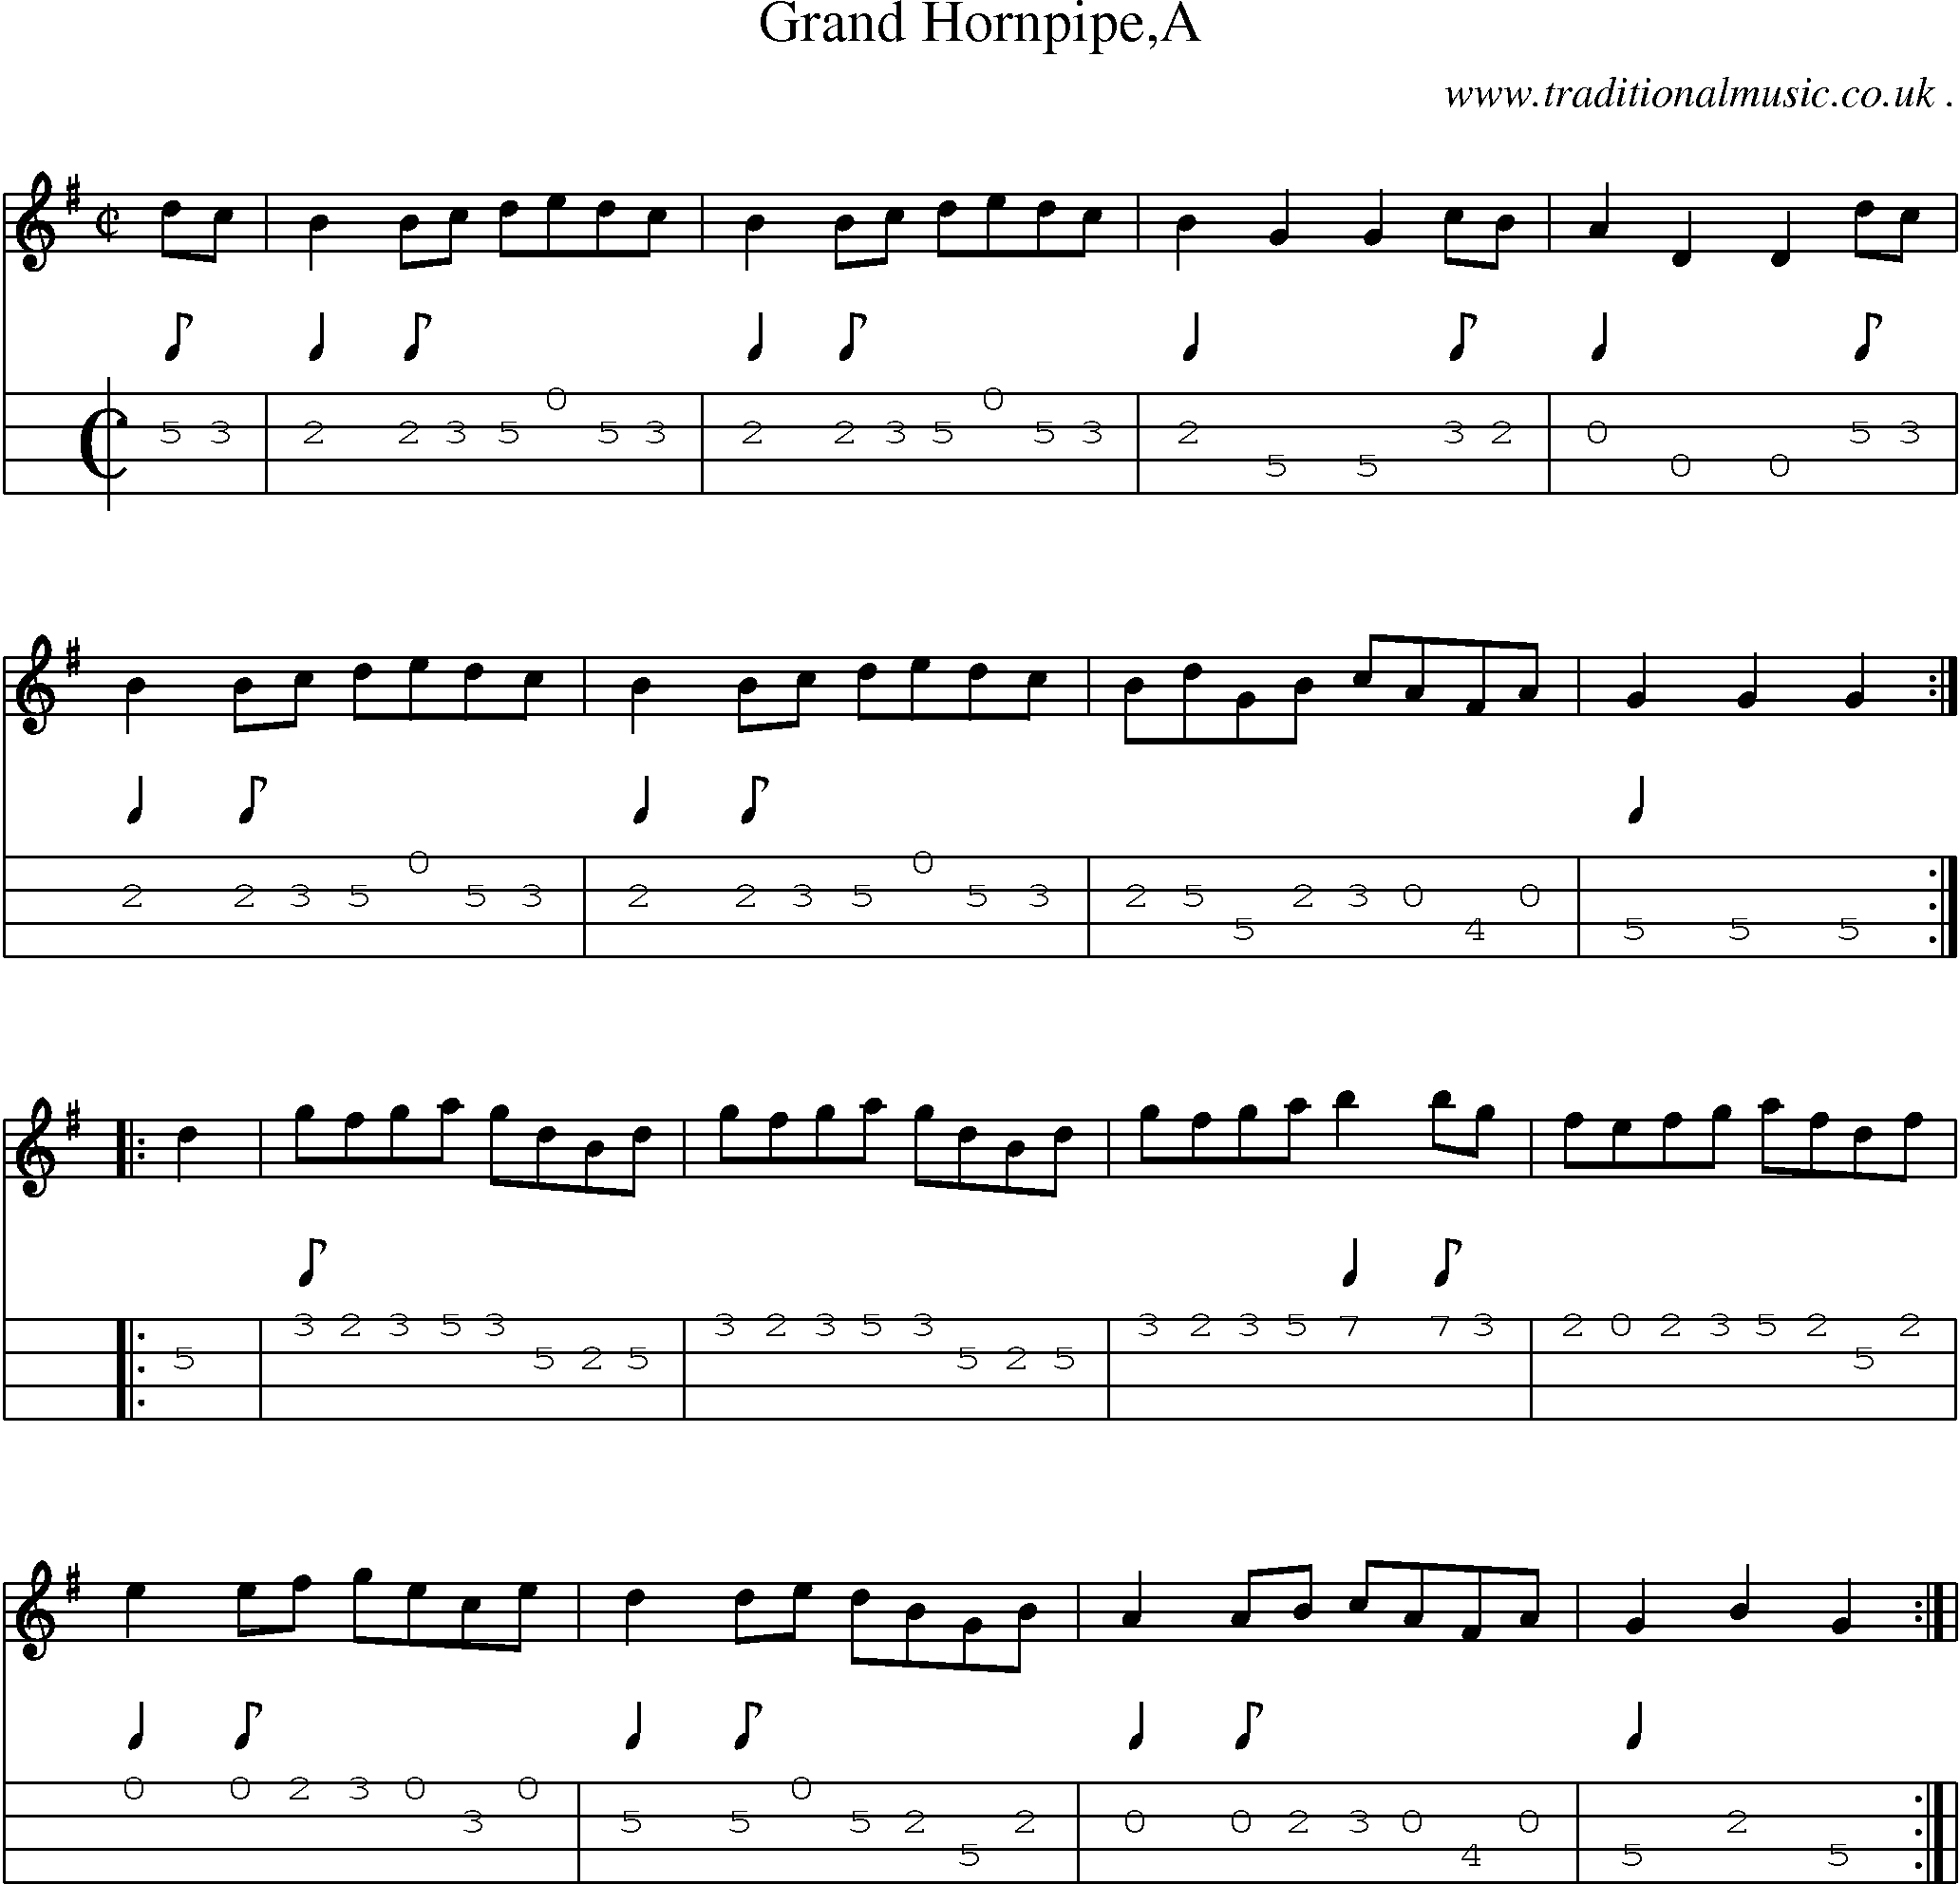 Sheet-Music and Mandolin Tabs for Grand Hornpipea